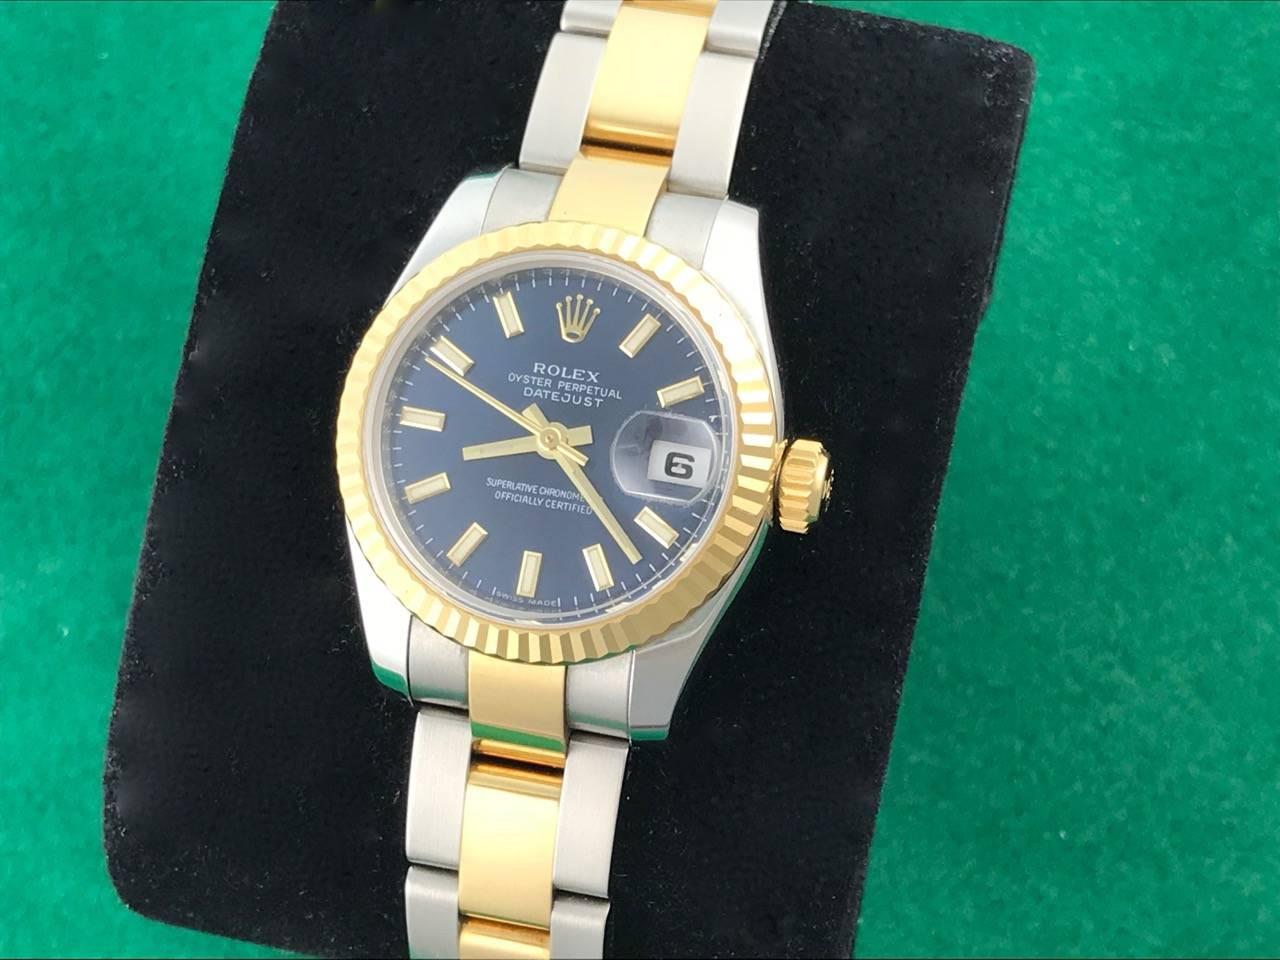 Ladies Rolex Datejust Ref 179173.  Certified pre-owned and ready to ship. Oyster Perpetual, Automatic winding movement.  Blue Dial with yellow gold and luminous hour markers. Features a Stainless Steel case with 18k Yellow Gold fluted bezel (26mm